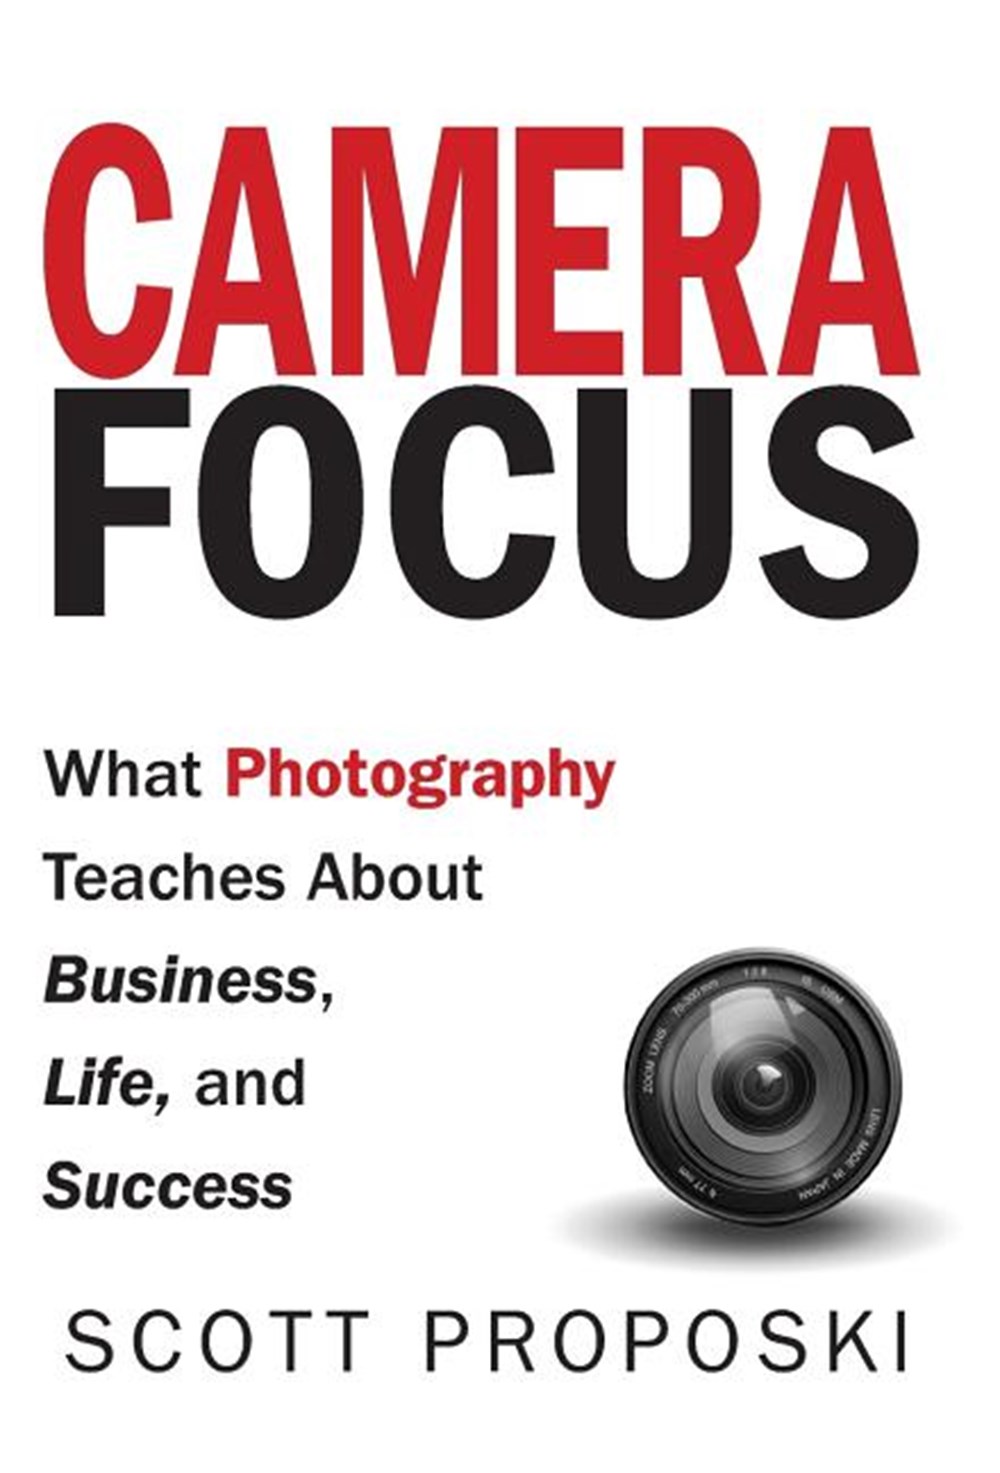 Camera Focus What Photography Teaches About Business, Life, and Success